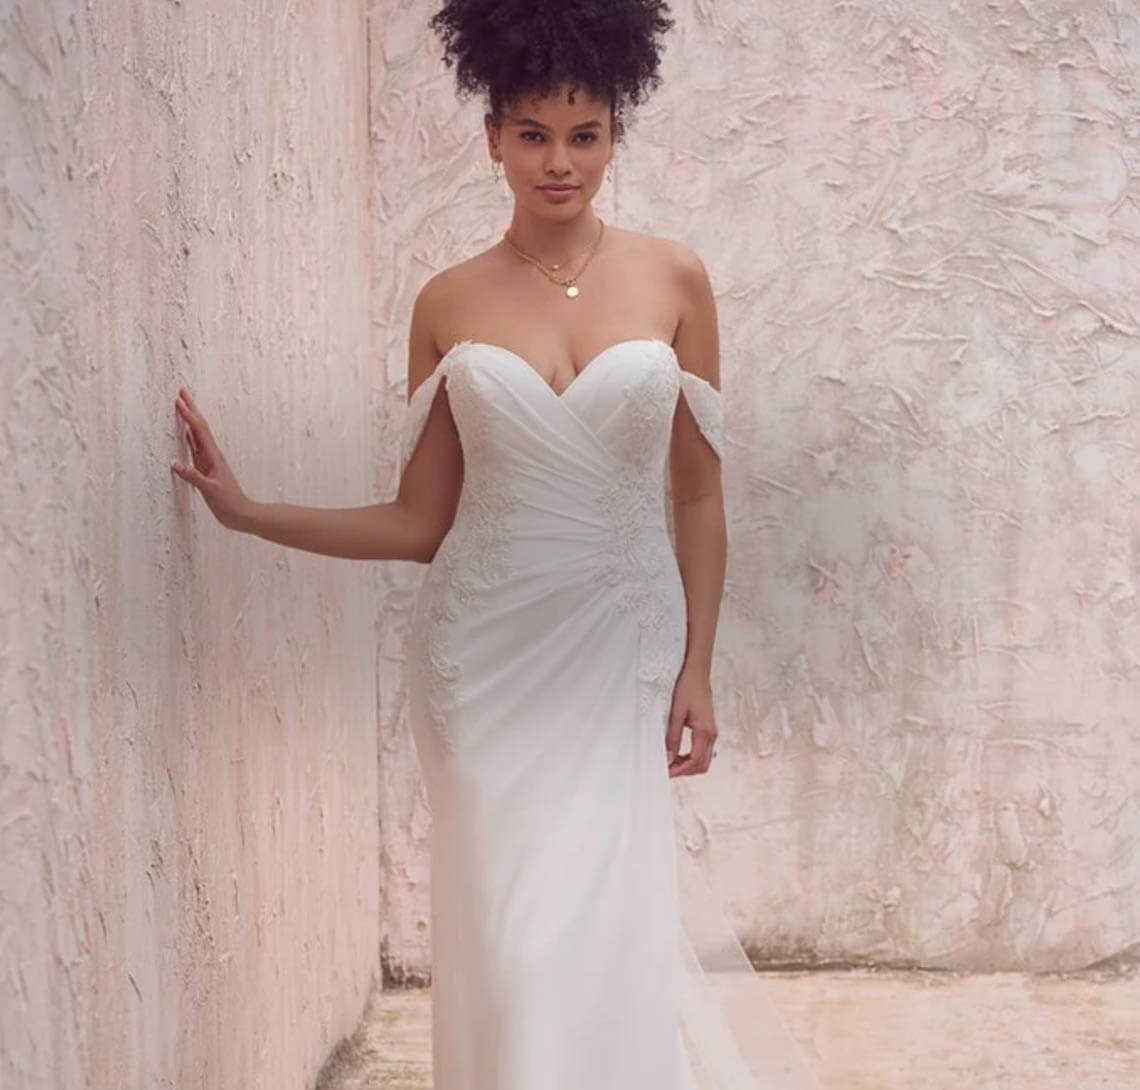 Model wearing a white gown. Mobile image